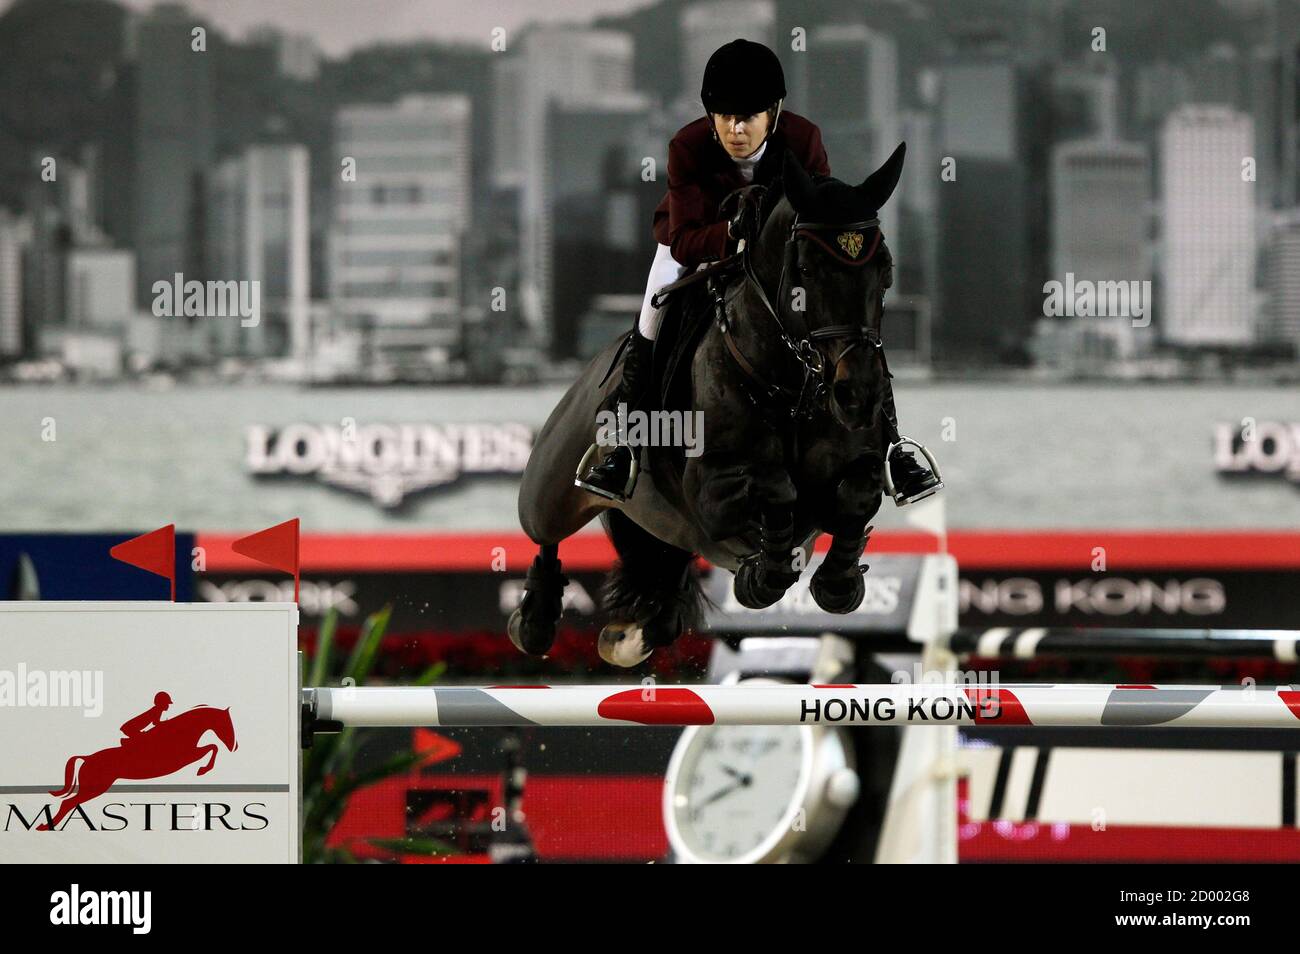 Edwina Tops-Alexander of Australia riding Guccio clears a hurdle to finish second runner-up during Gucci Gold Cup 1.50-meter jumping competition as part of the Longines Hong Kong Masters March 1, 2013.  REUTERS/Bobby Yip (CHINA - Tags: SPORT EQUESTRIANISM) Stock Photo